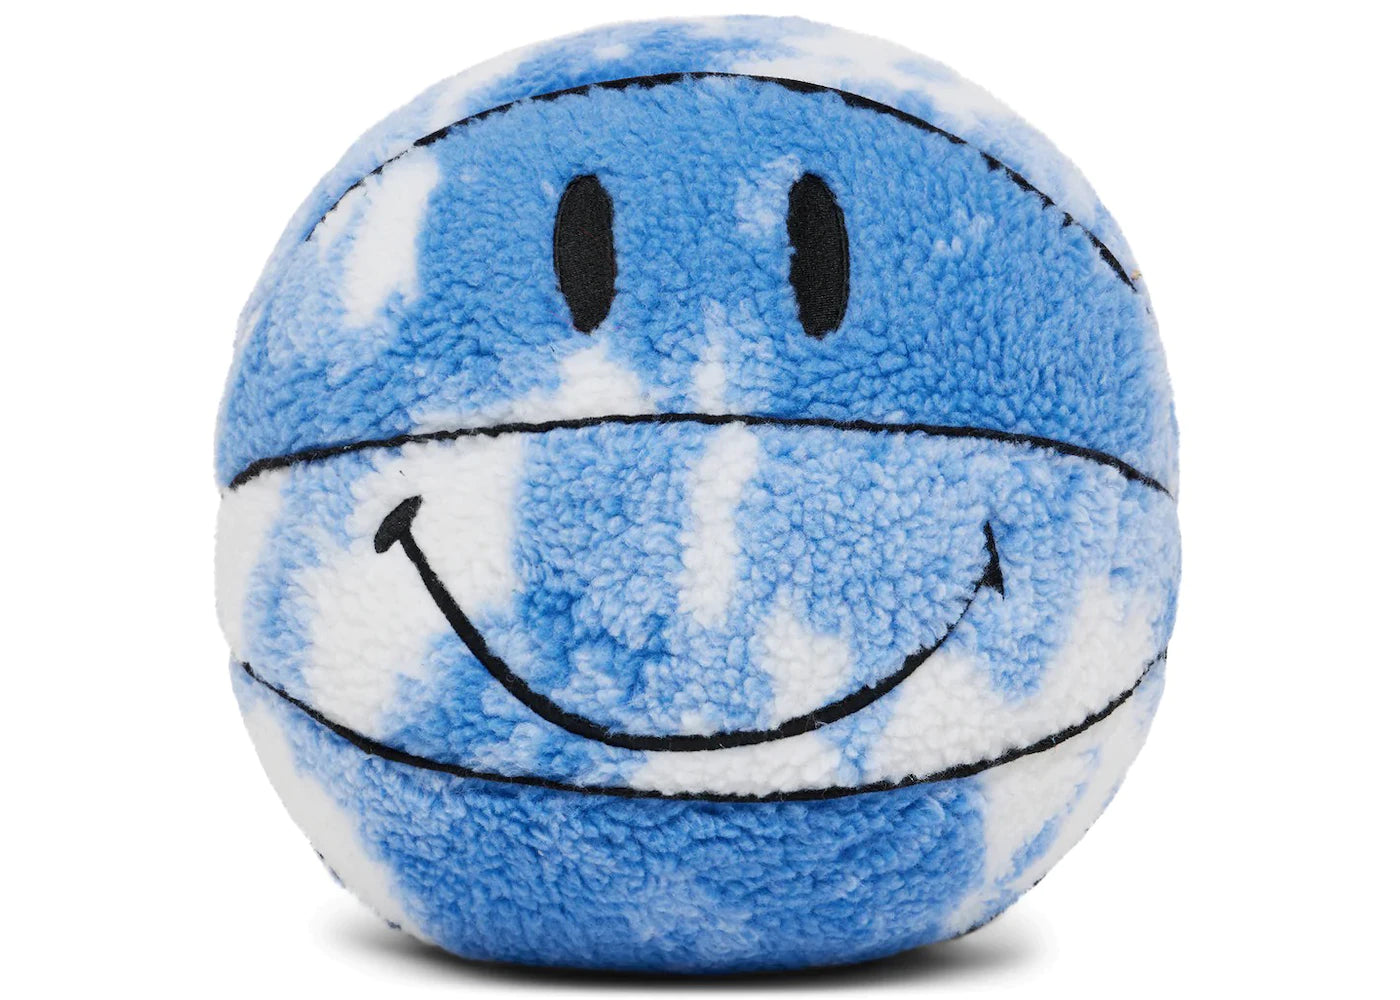 SMILEY® MARKET IN THE CLOUDS PLUSH BASKETBALL